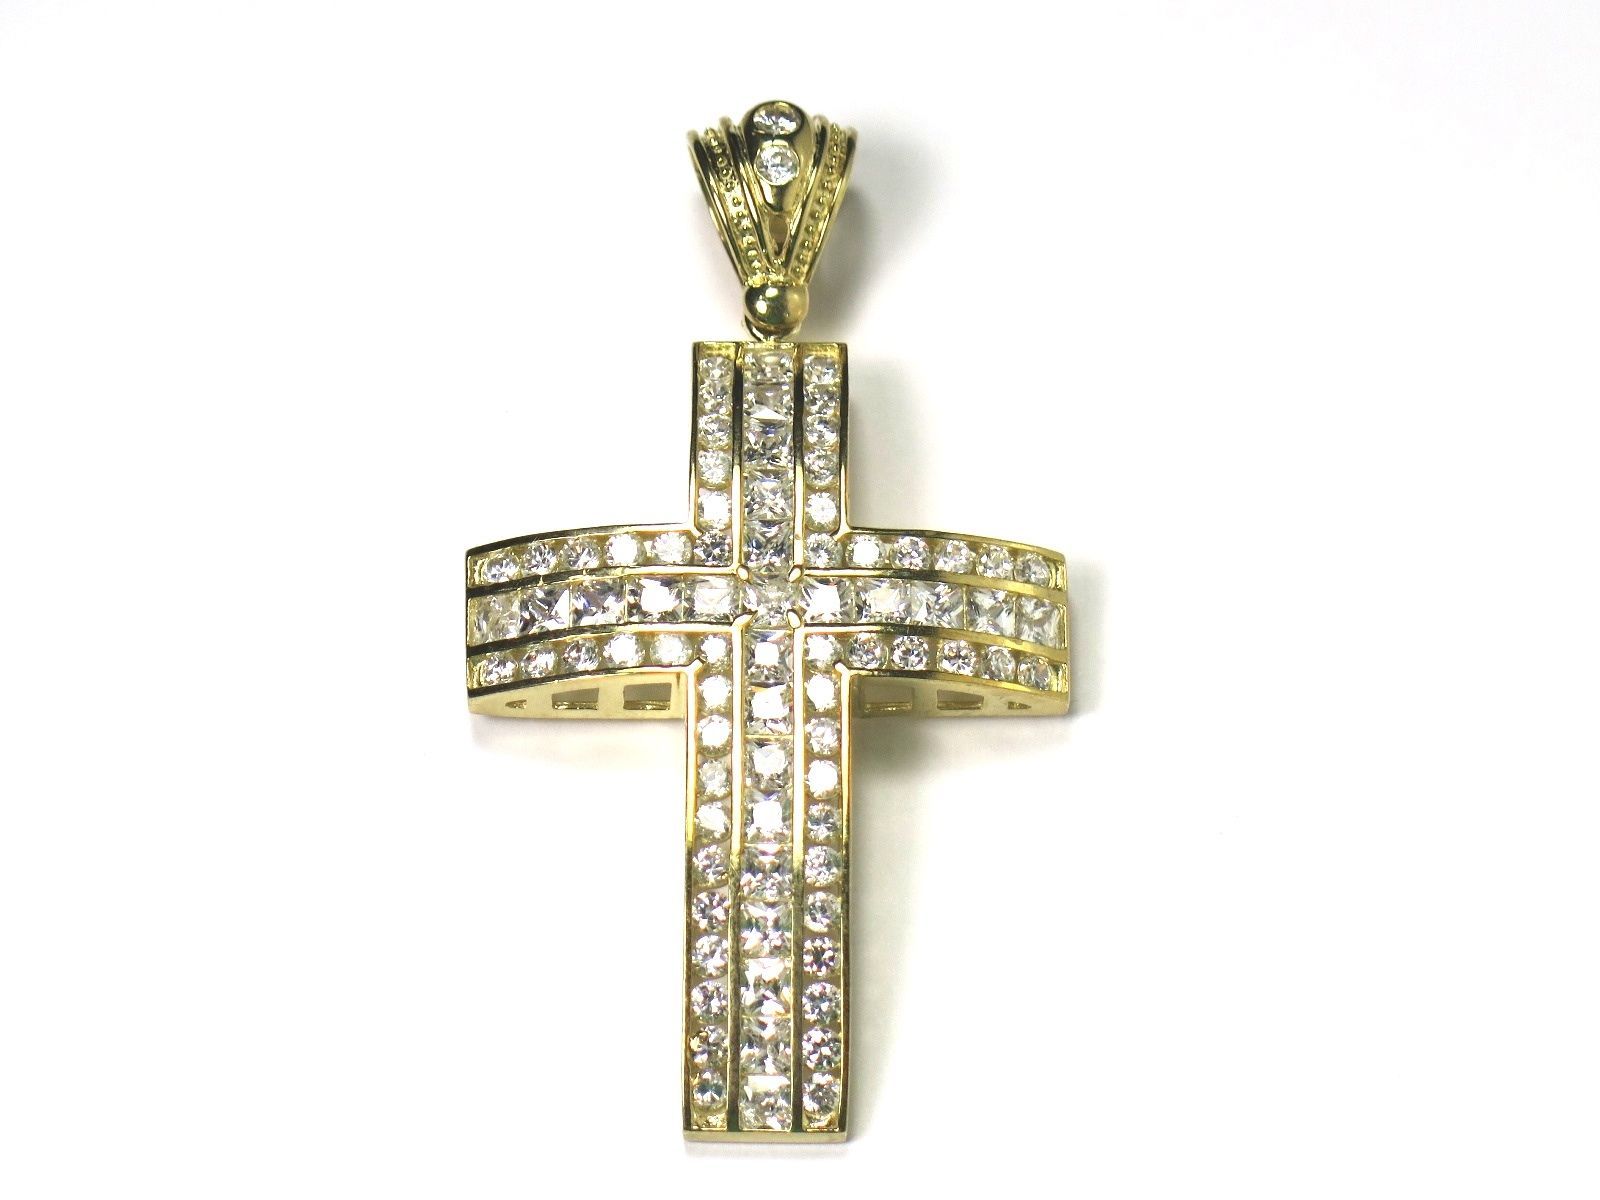 10k Yellow Gold CZ Large Cross With 3 Rows Cz Stones 22g - $975.00